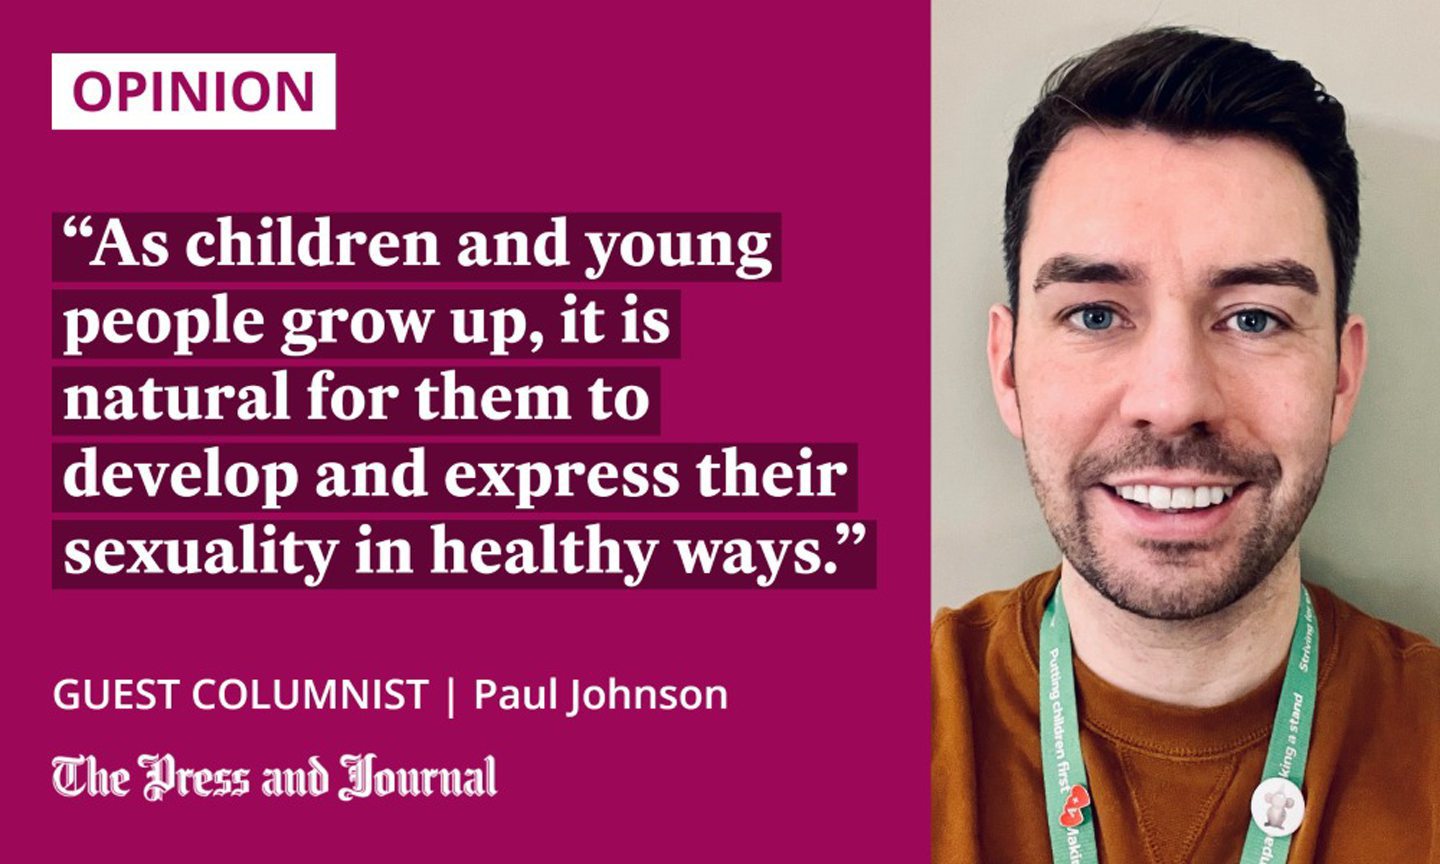 Guest columnist, Paul Johnson, speaks on teaching about sexuality: "As children and young people grow up, it is natural for them to develop and express their sexuality in healthy ways."